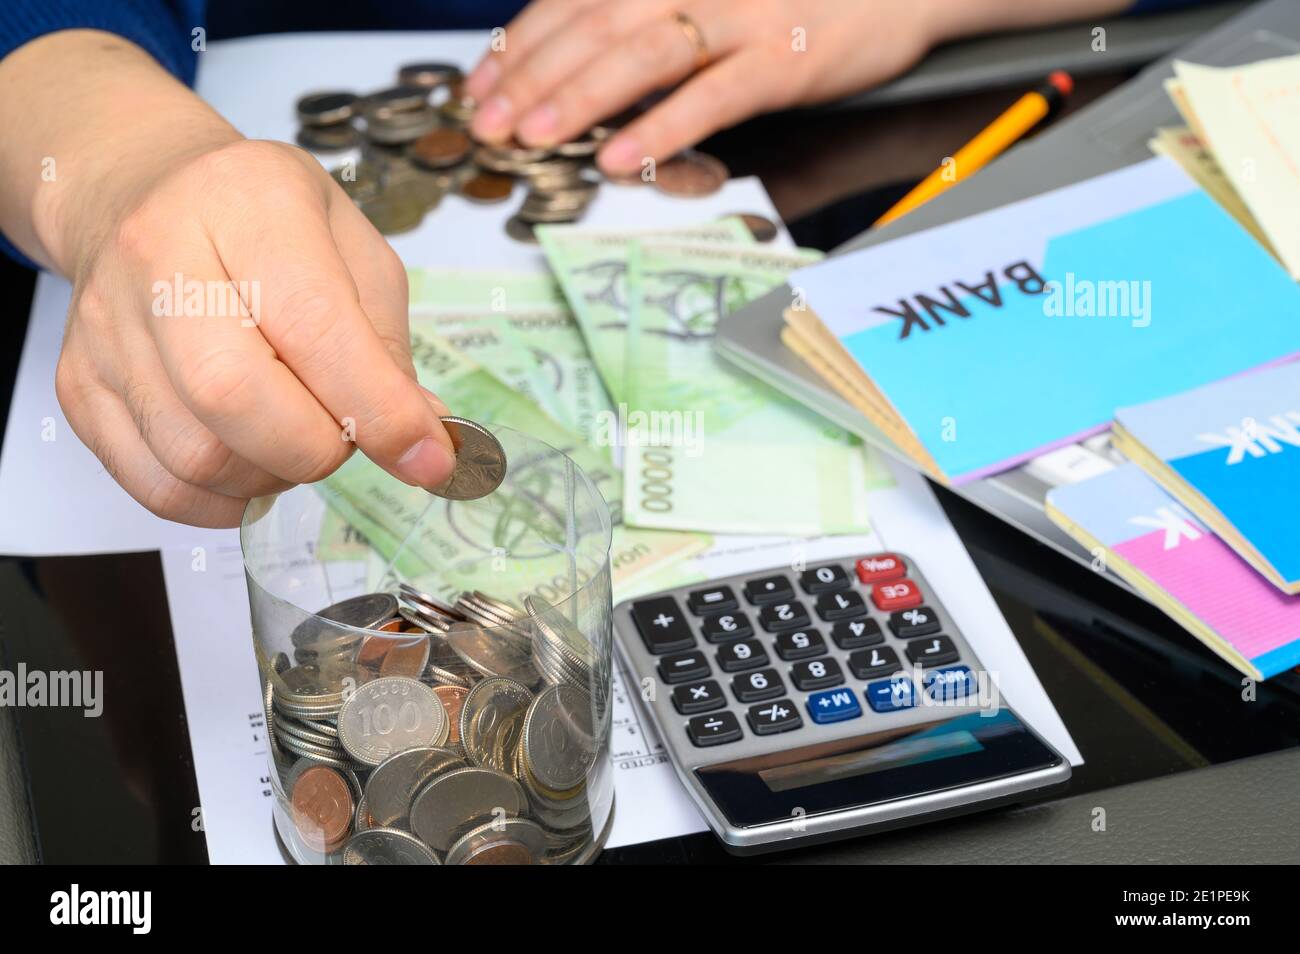 The hands of the men who are holding a bank passbook and weaving a budget. Stock Photo